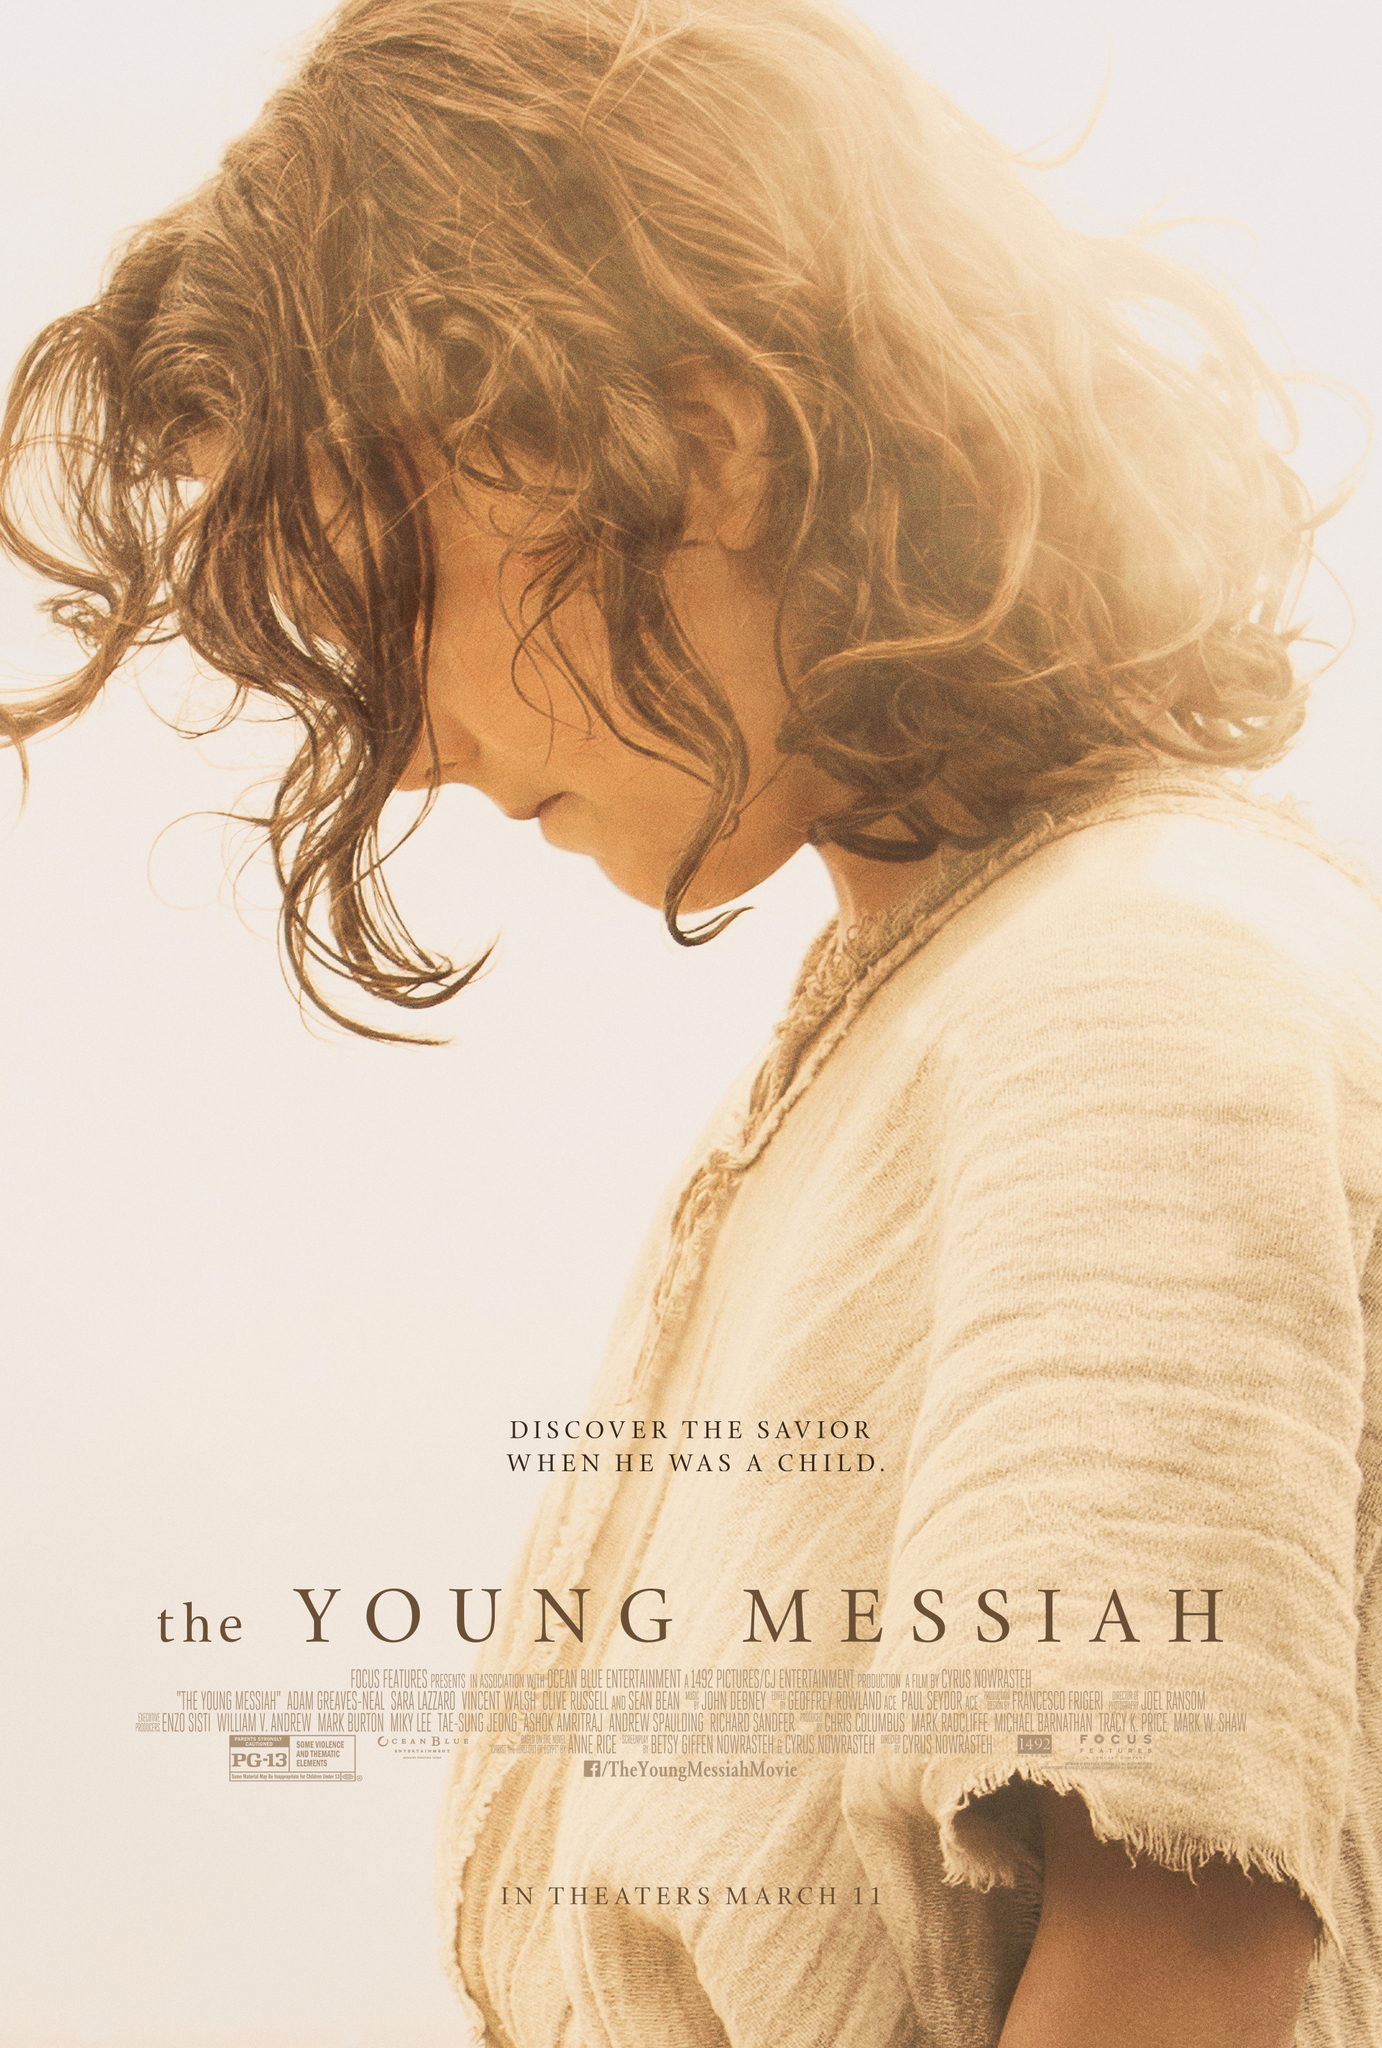 The Young Messiah (2016) Main Poster